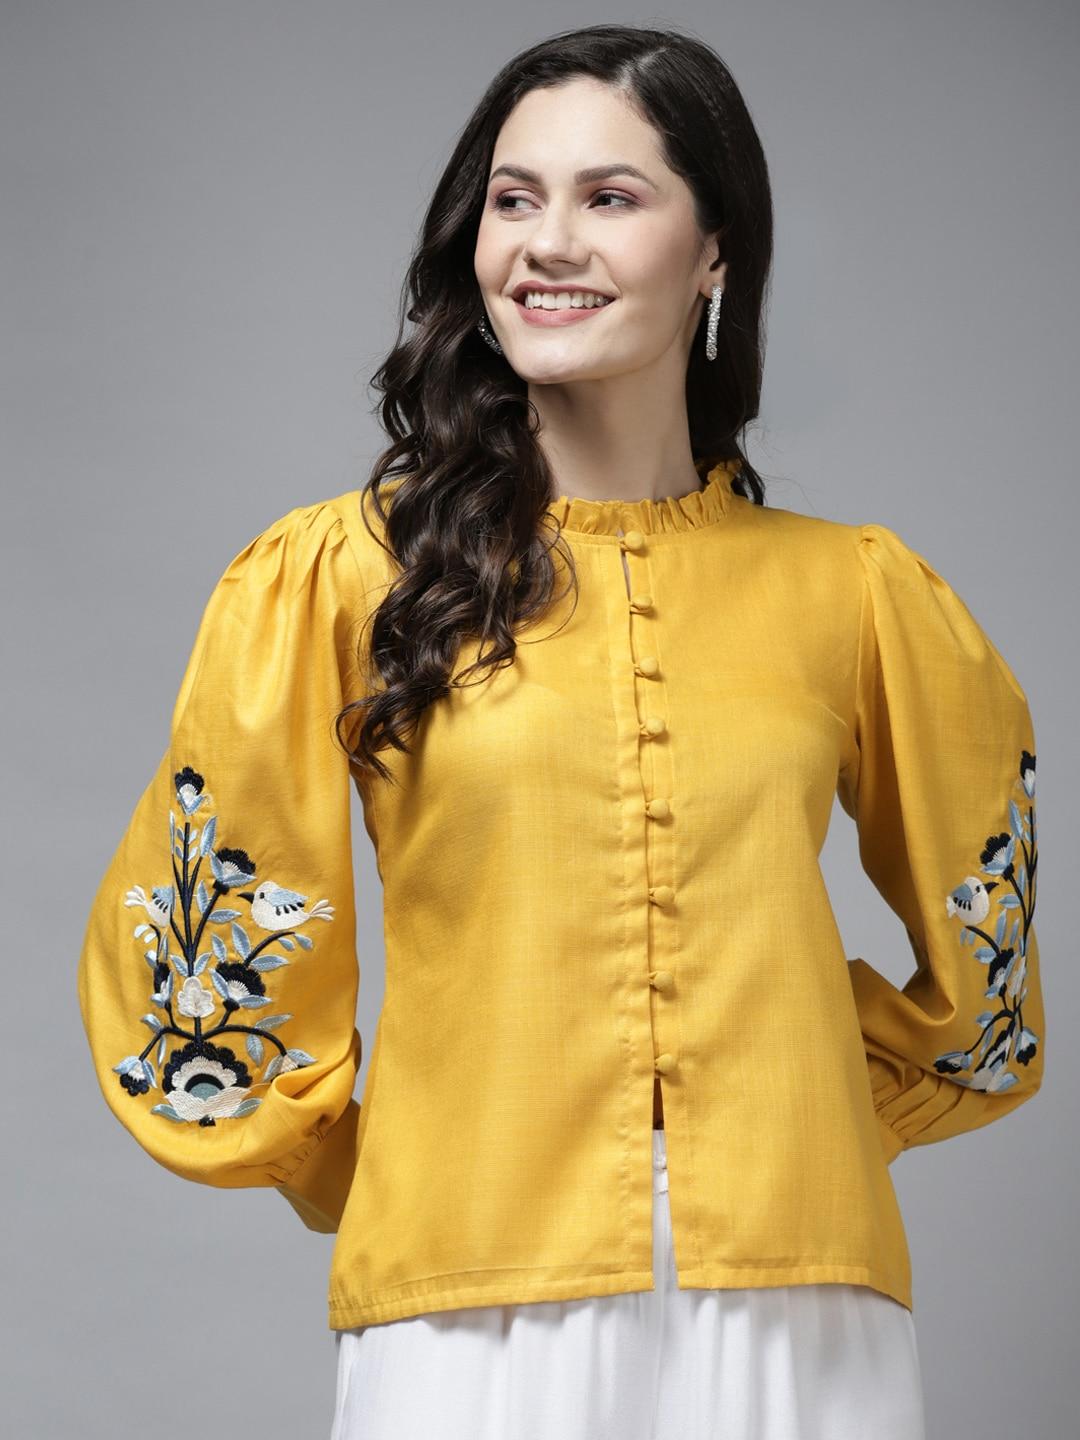 bhama-couture-mustard-yellow-floral-print-ruffles-shirt-style-top